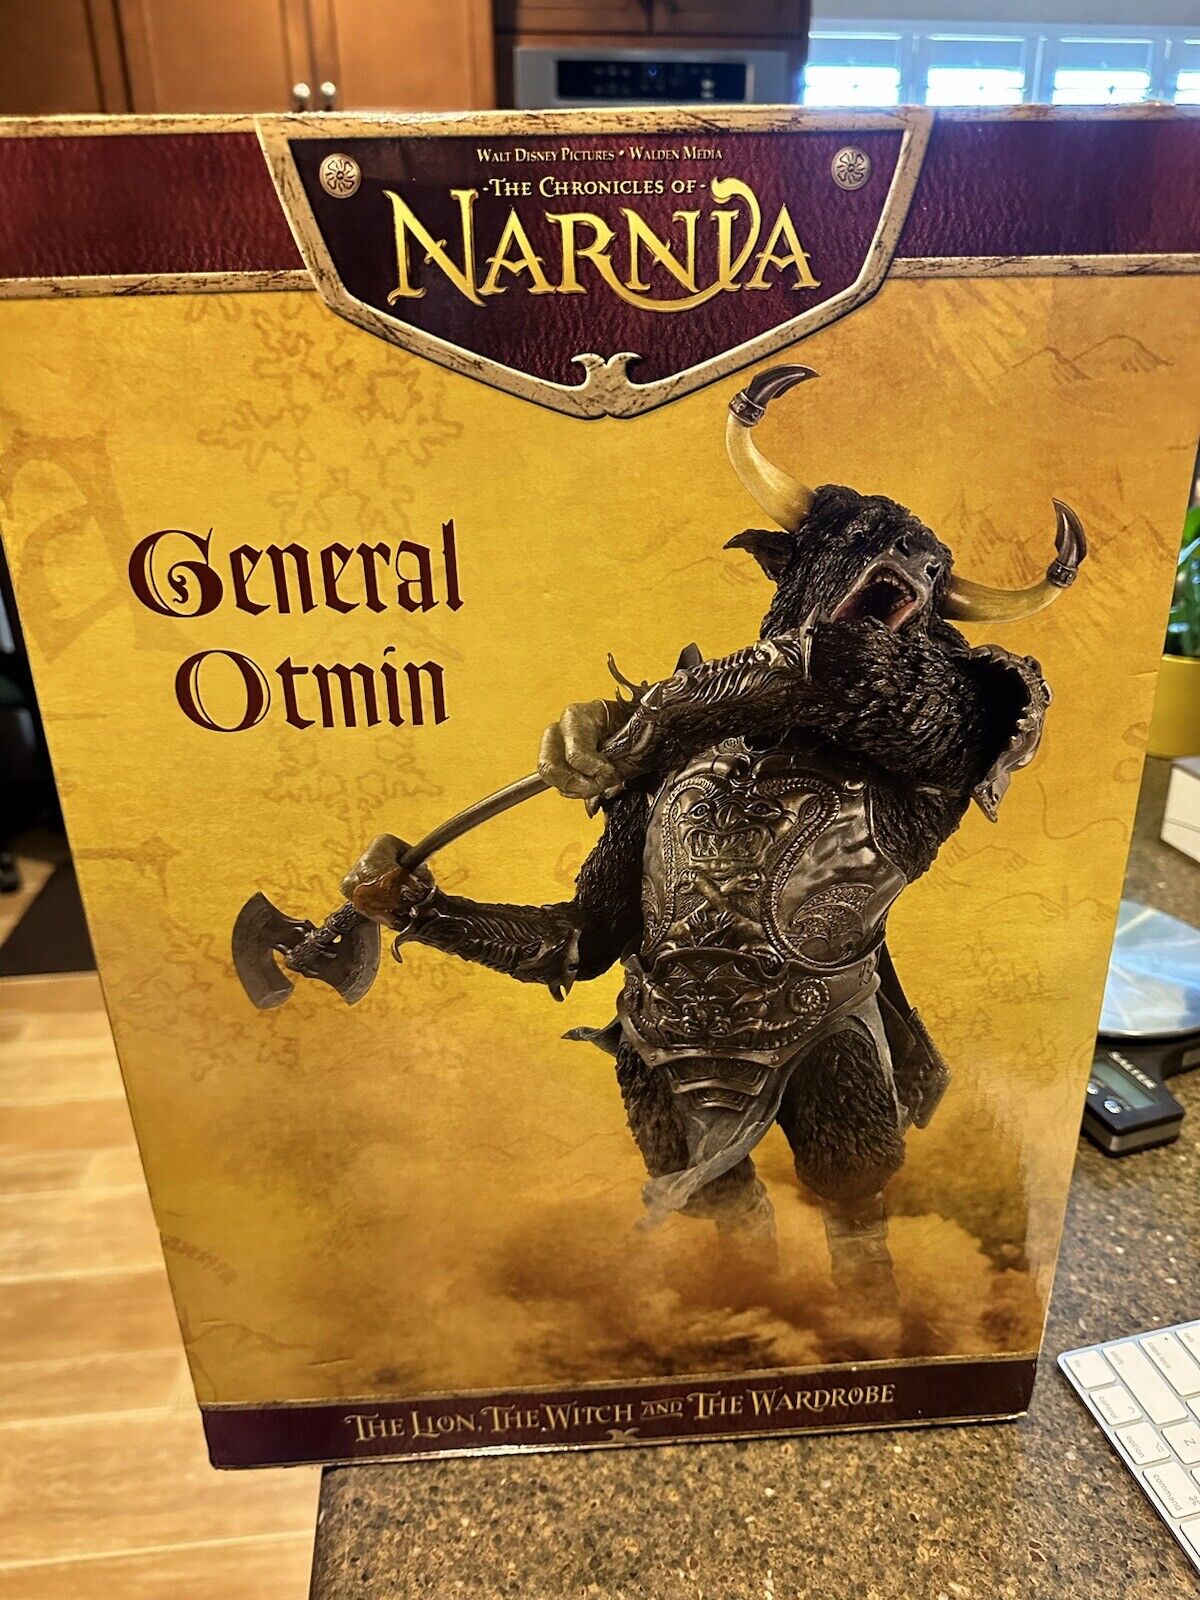 Chronicles Of Narnia: General Otmin Statue Weta Collectibles 15” Tall Limited